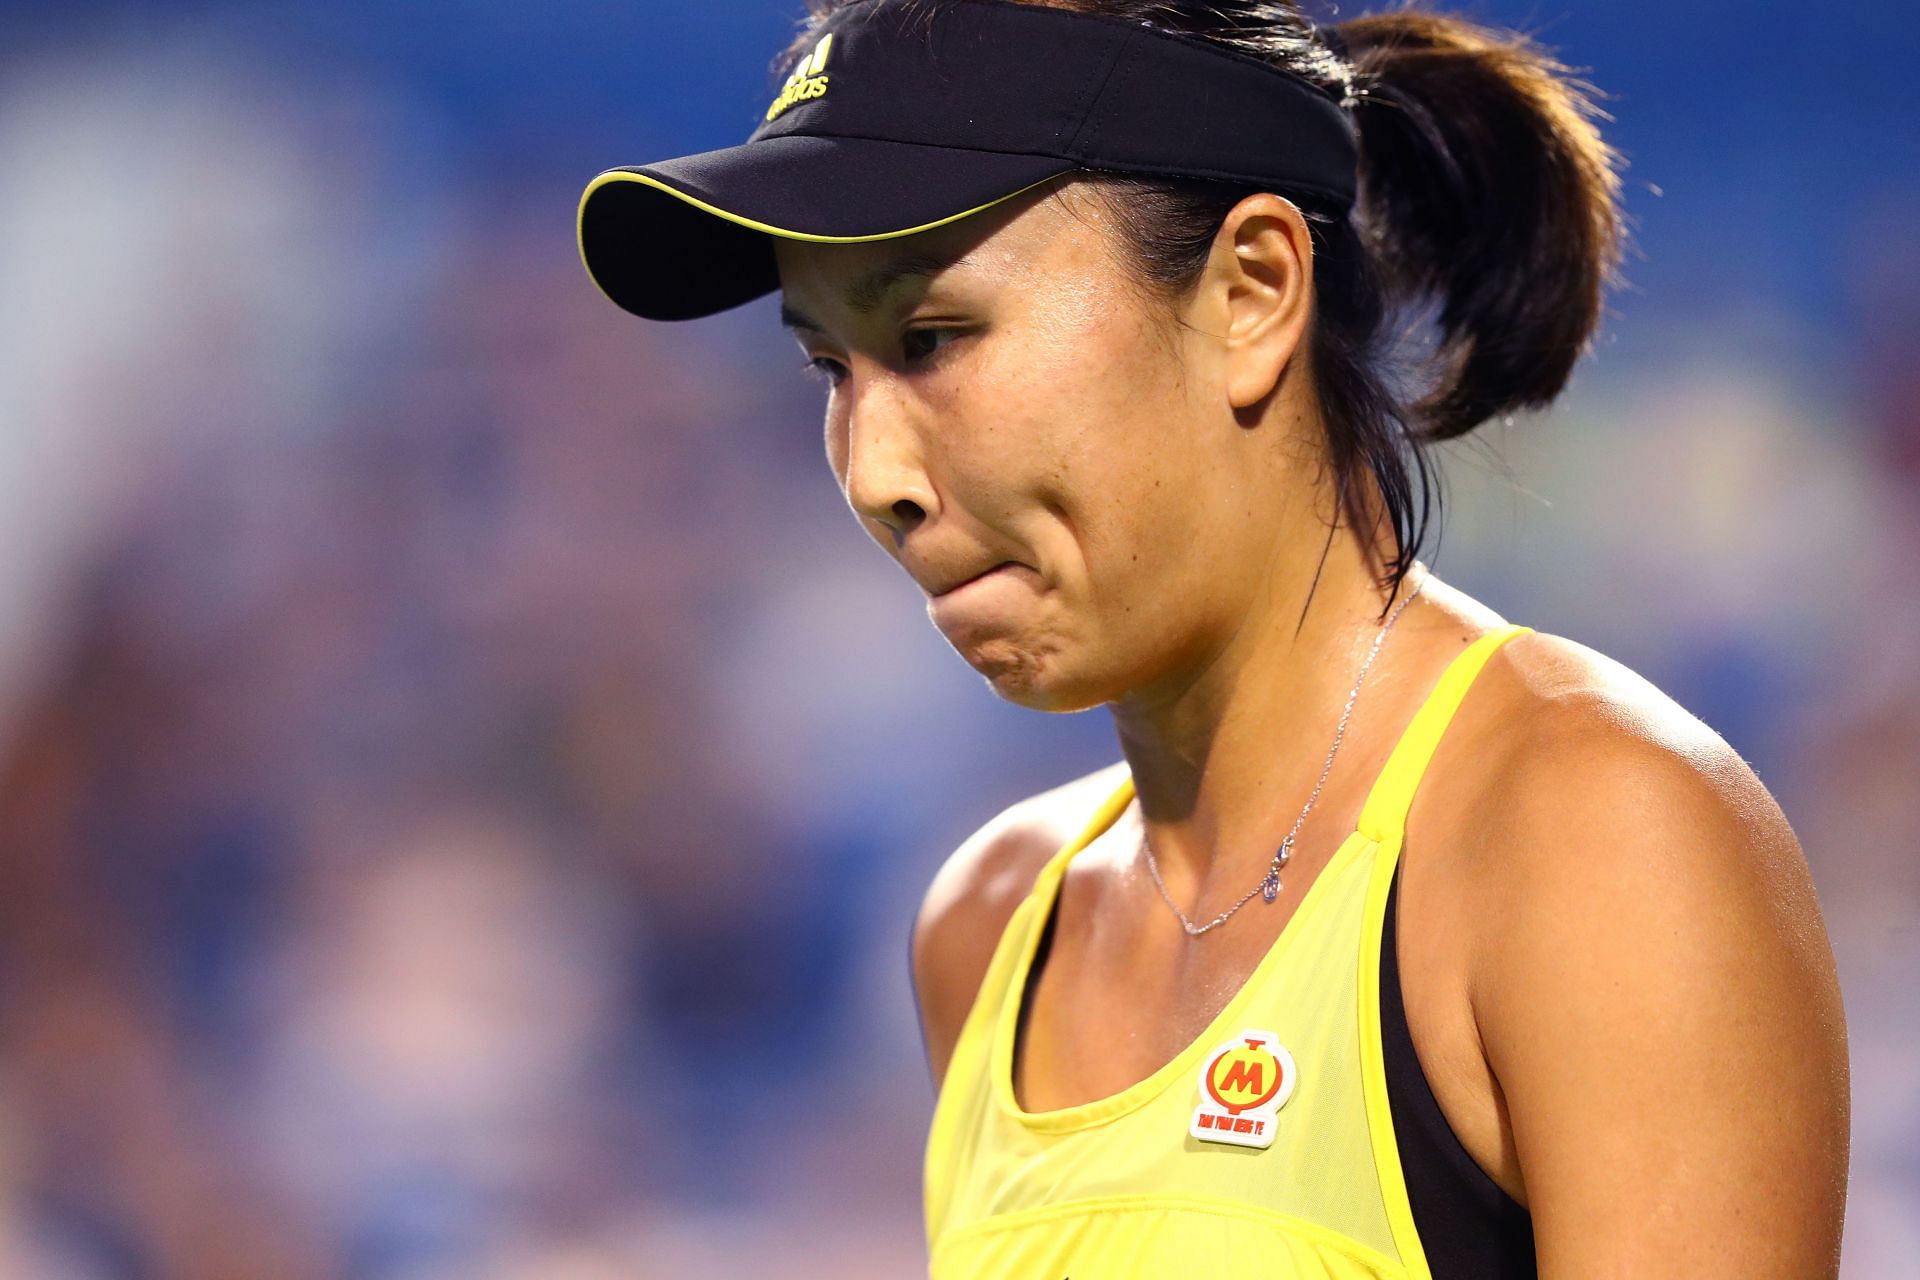 Peng Shuai hasn&#039;t been heard from since making allegations against a senior Chinese politician.